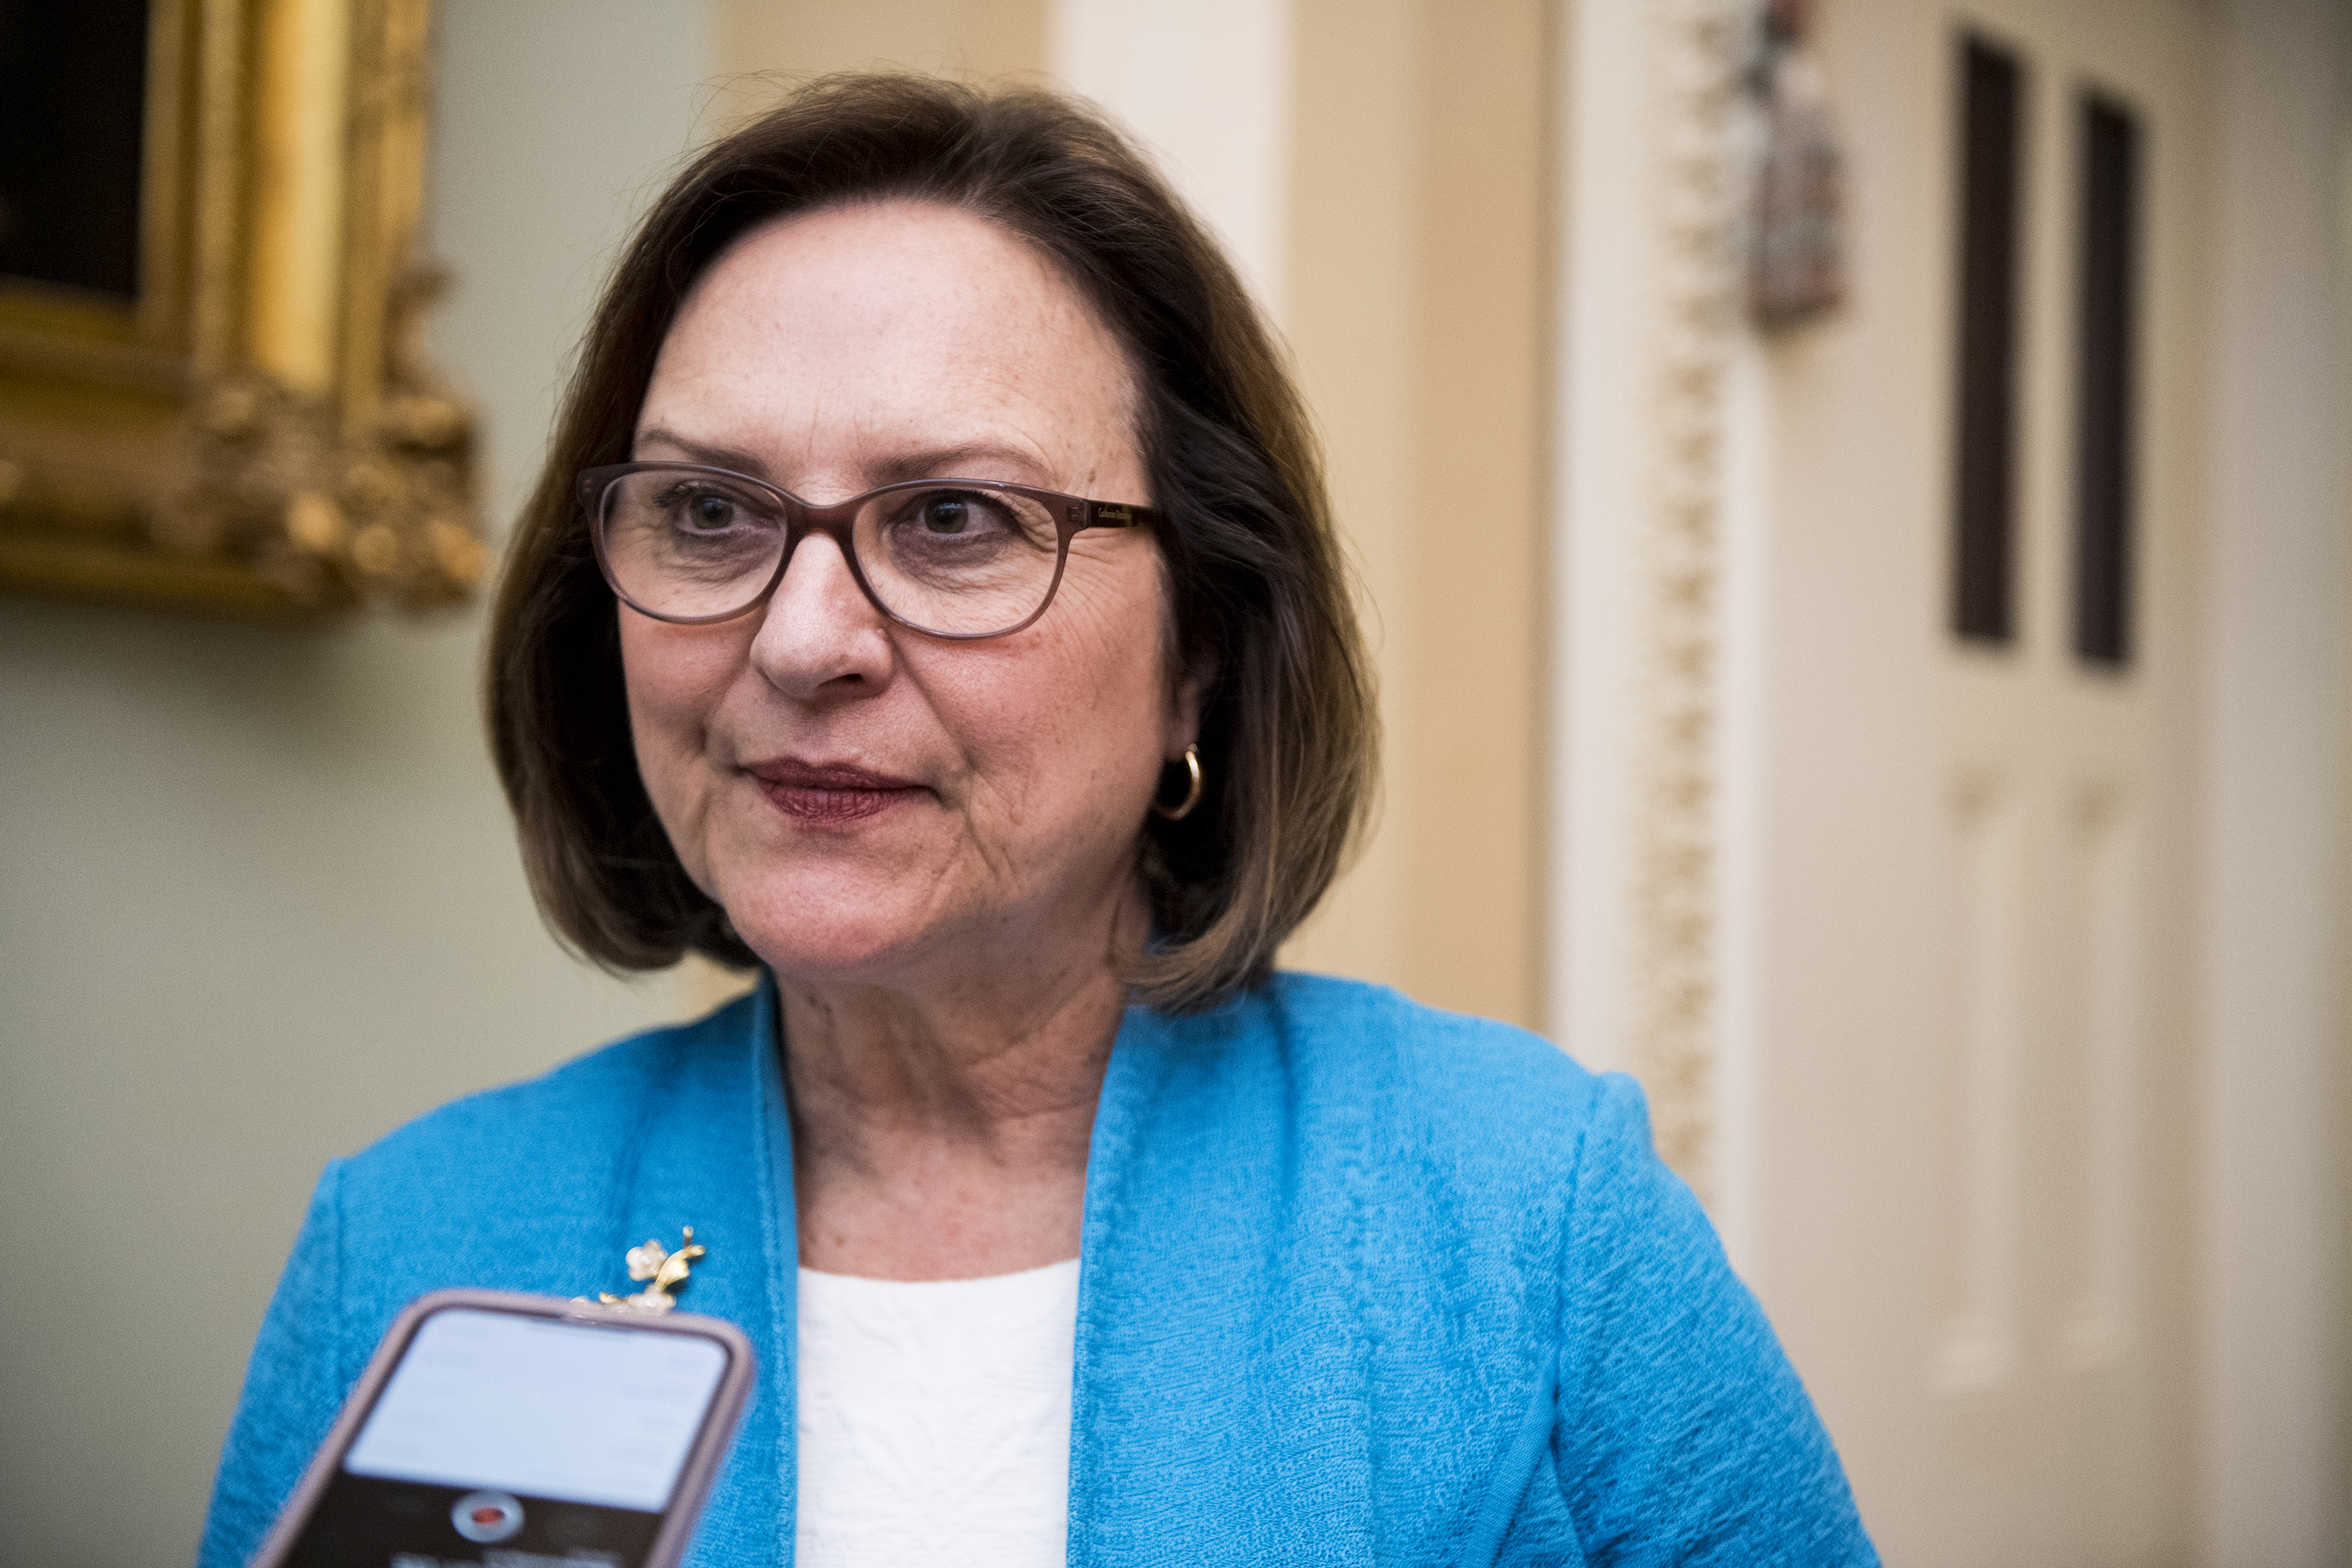 Sen. Deb Fischer, R-Neb., speaks with reporters in the Capitol on April 24, 2018.